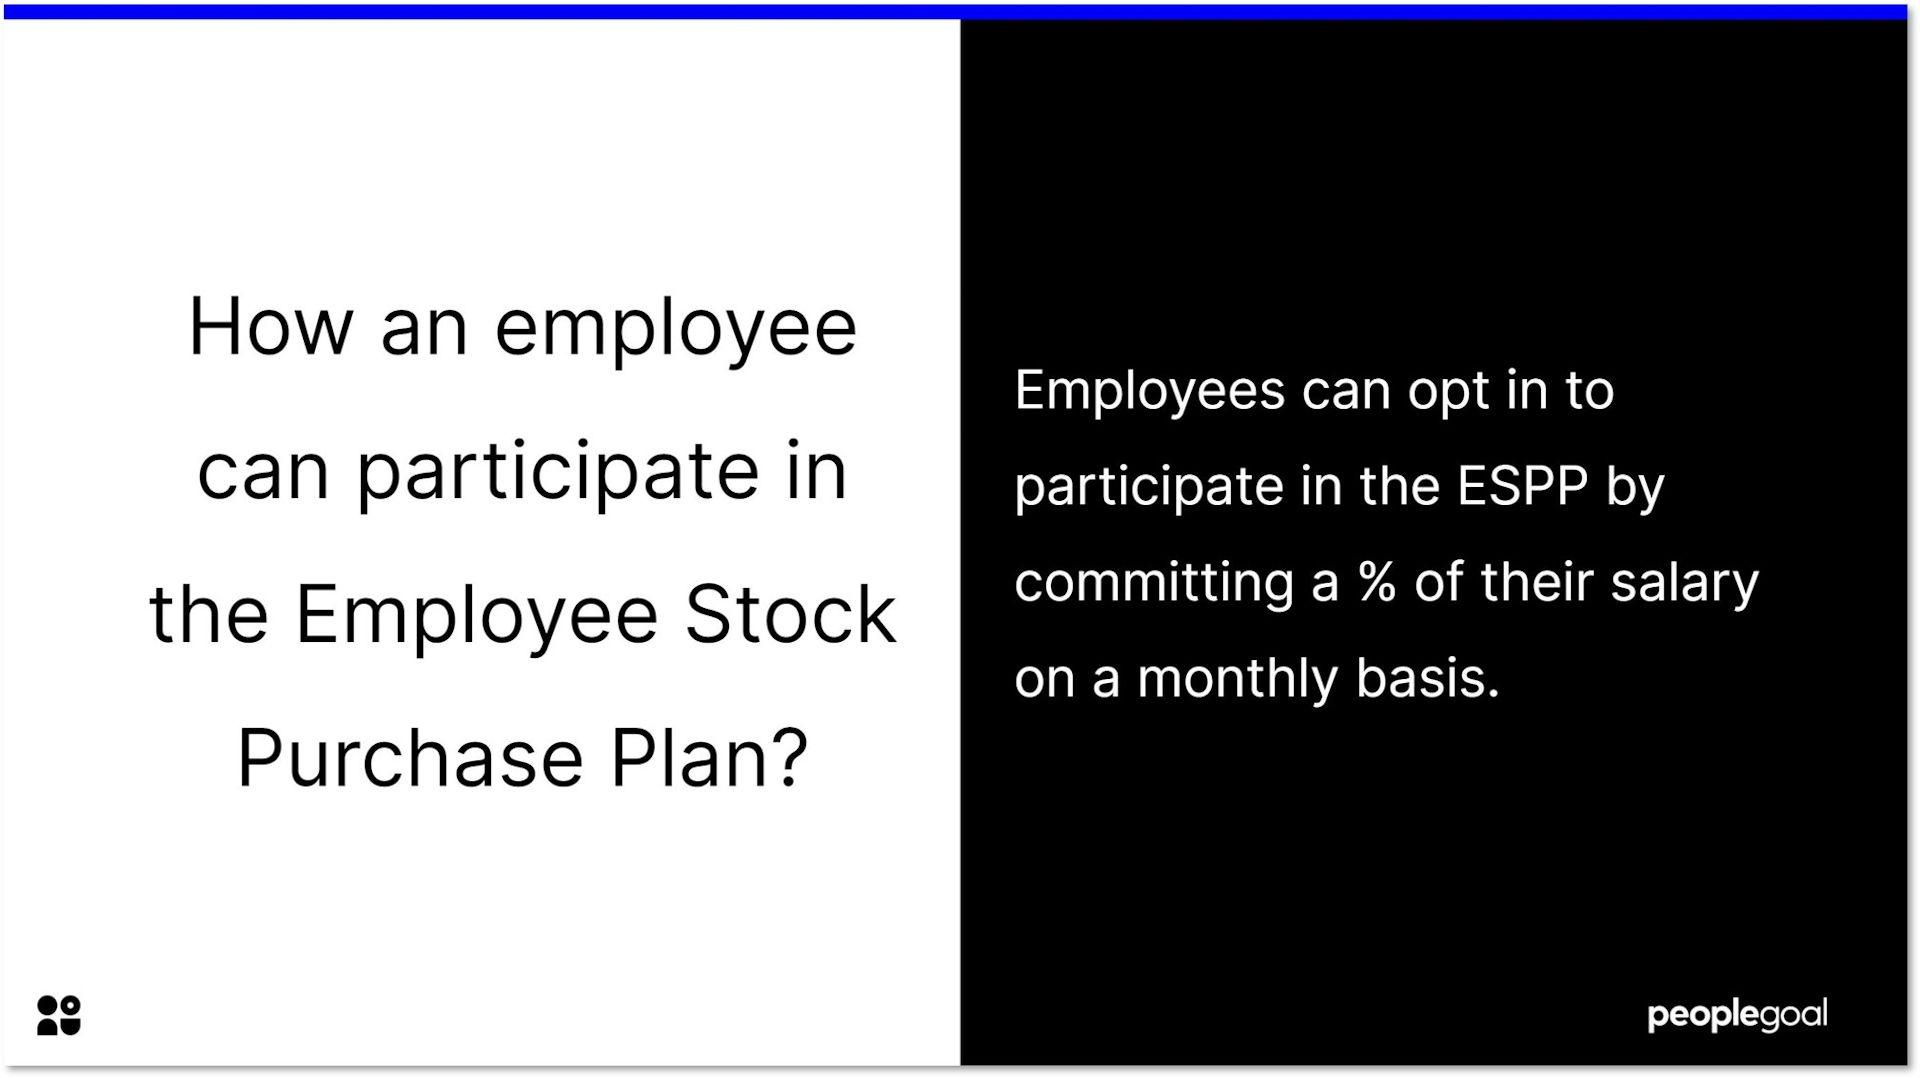 How an employee can participate in the employee stock purchase plan